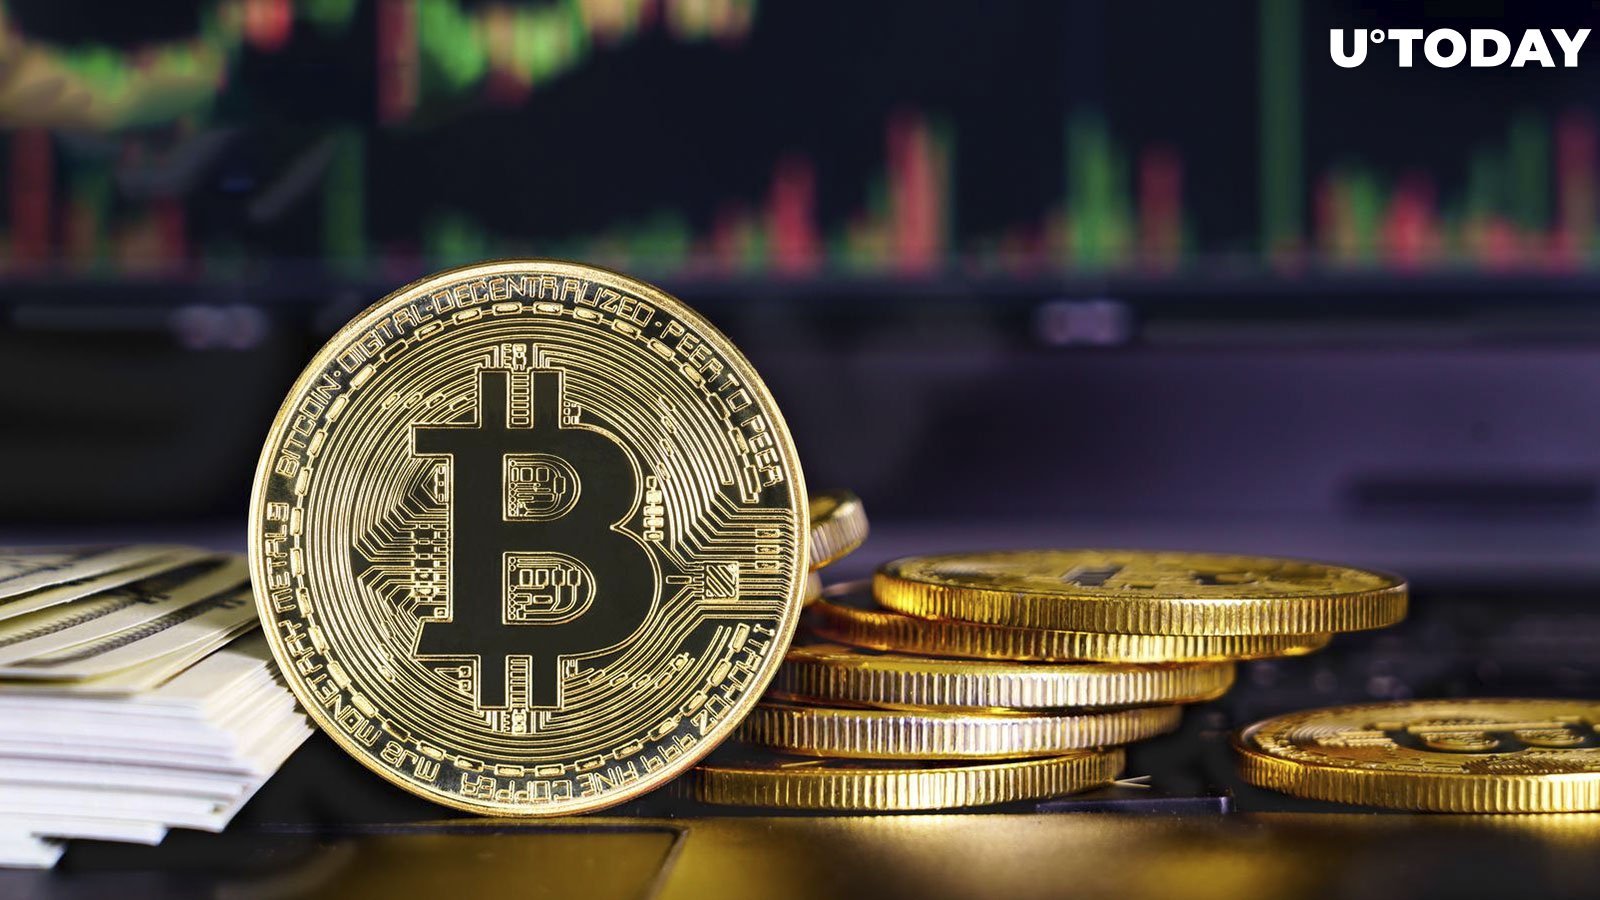 Bitcoin (BTC) Price Shows Resilience With Strong Accumulation Indicators